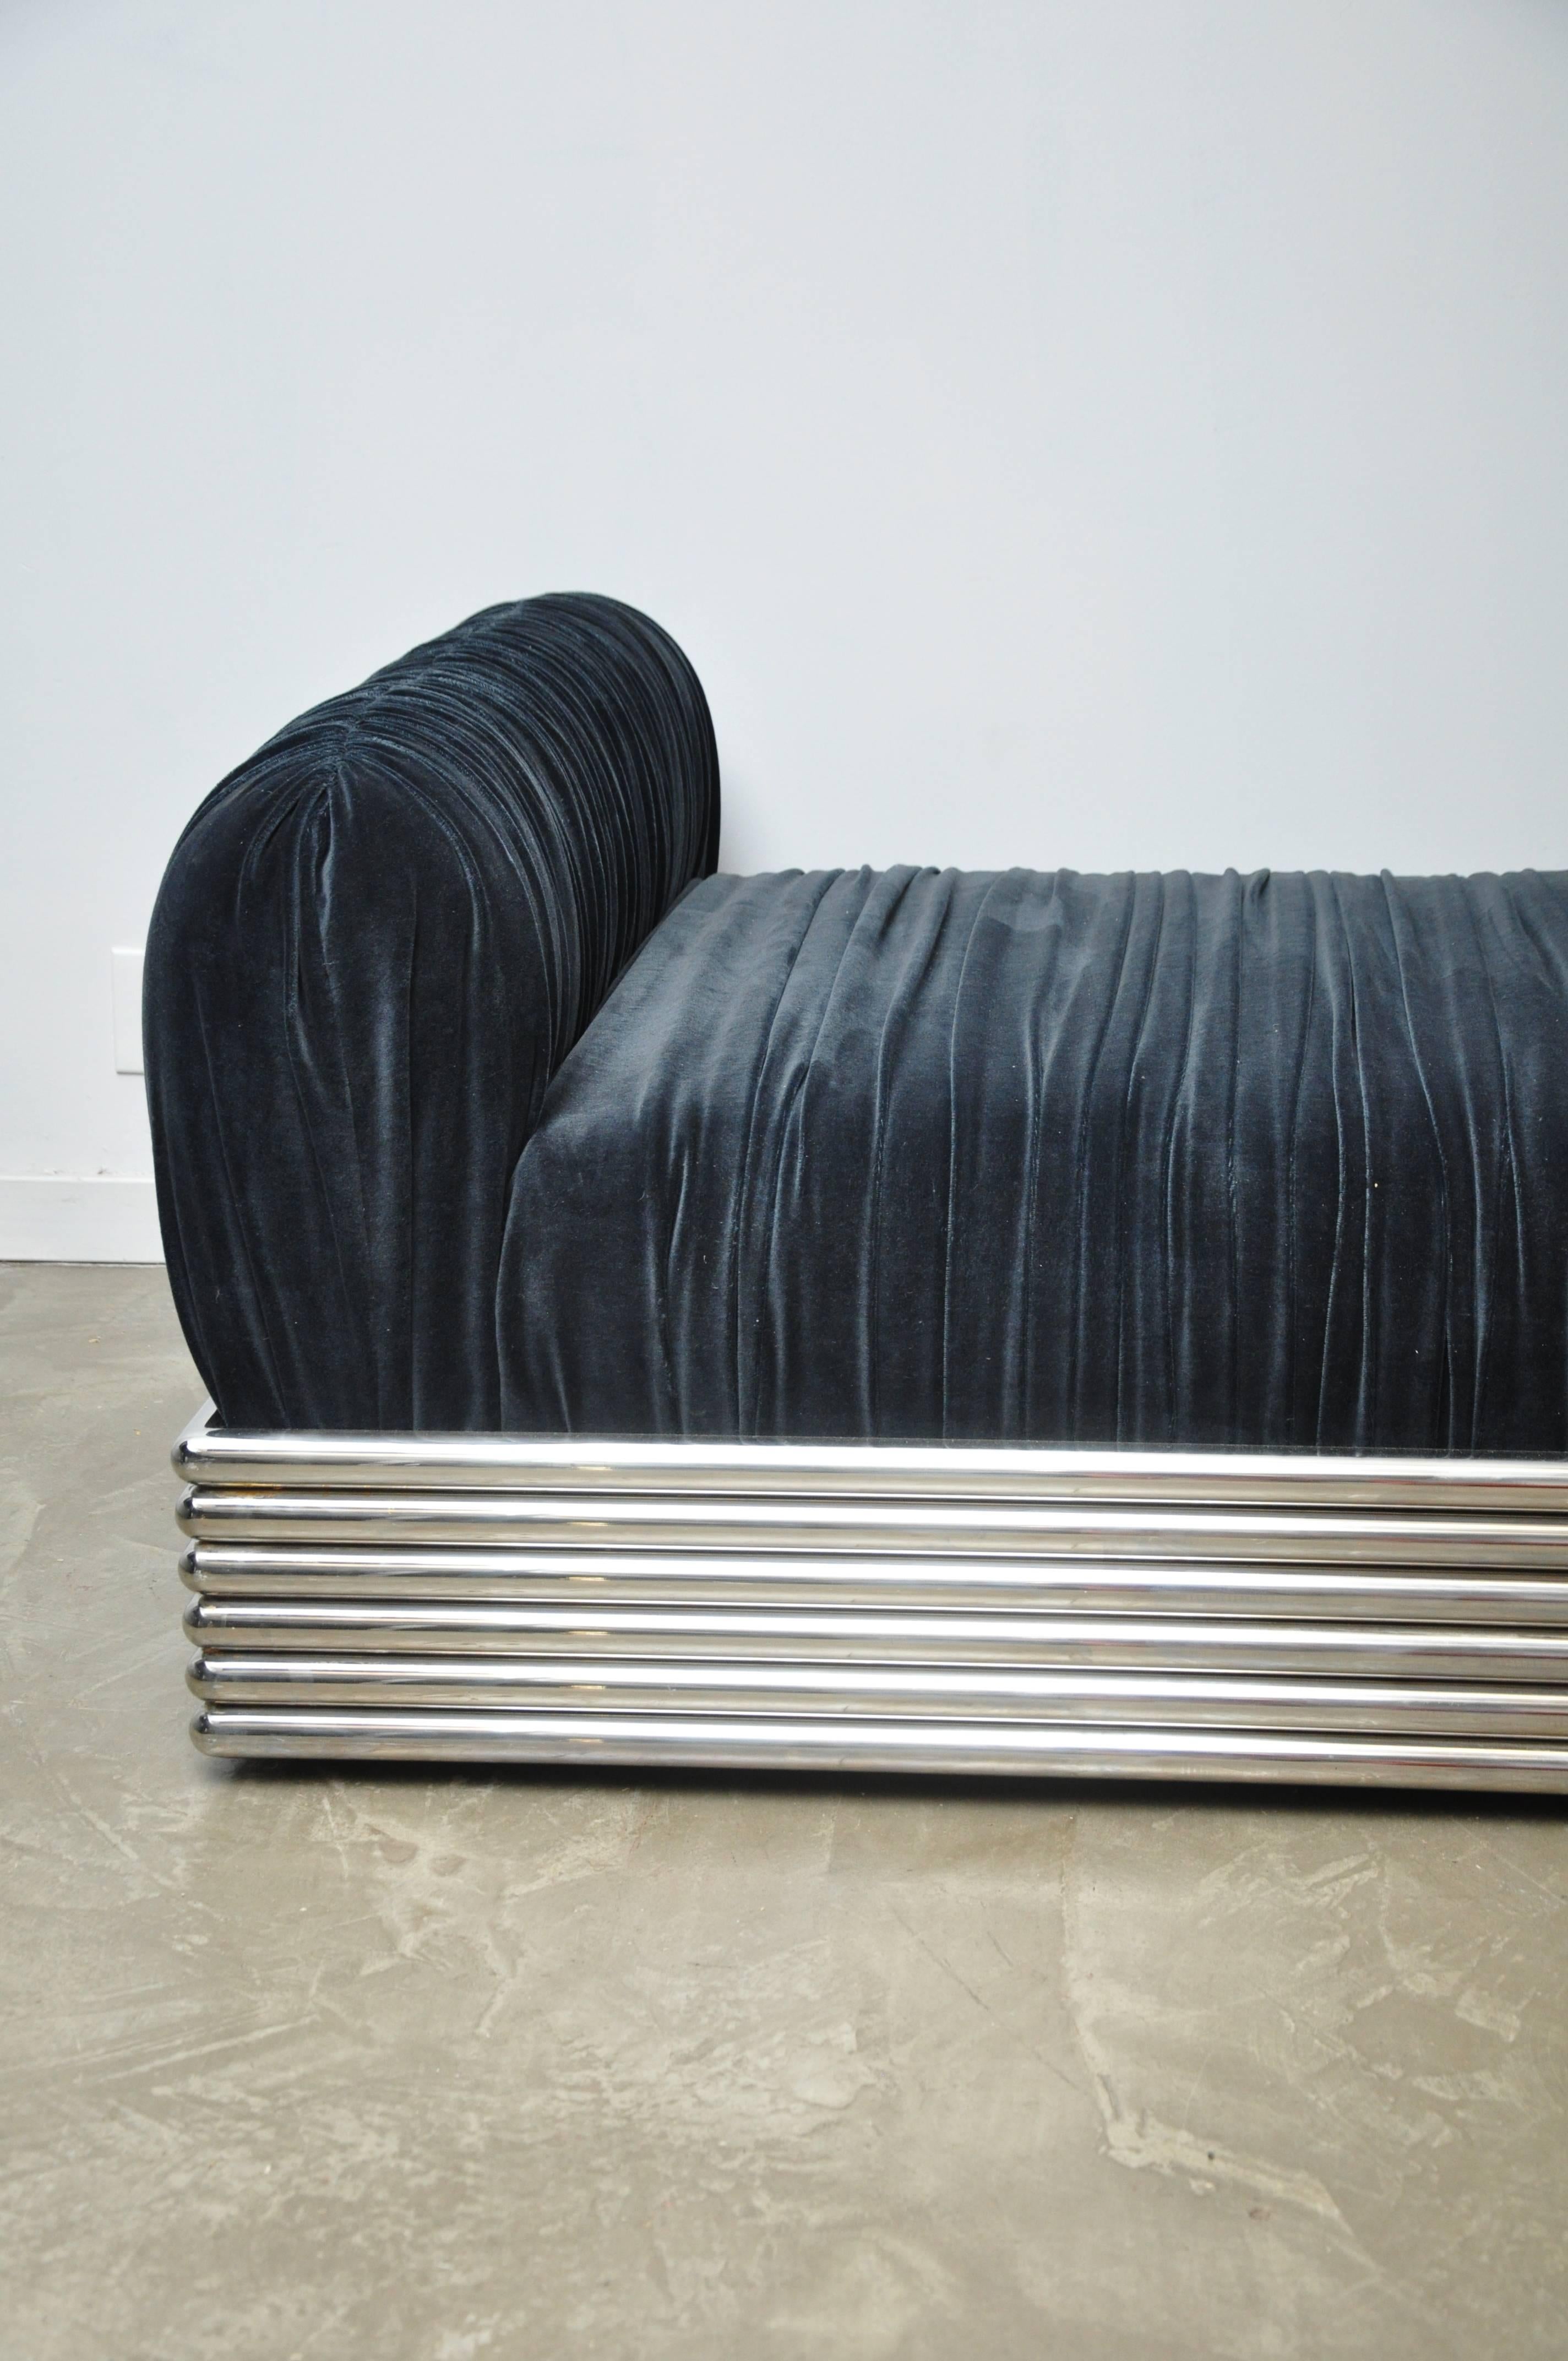 Stainless Steel Brueton Radiator Chaise Longue Daybed